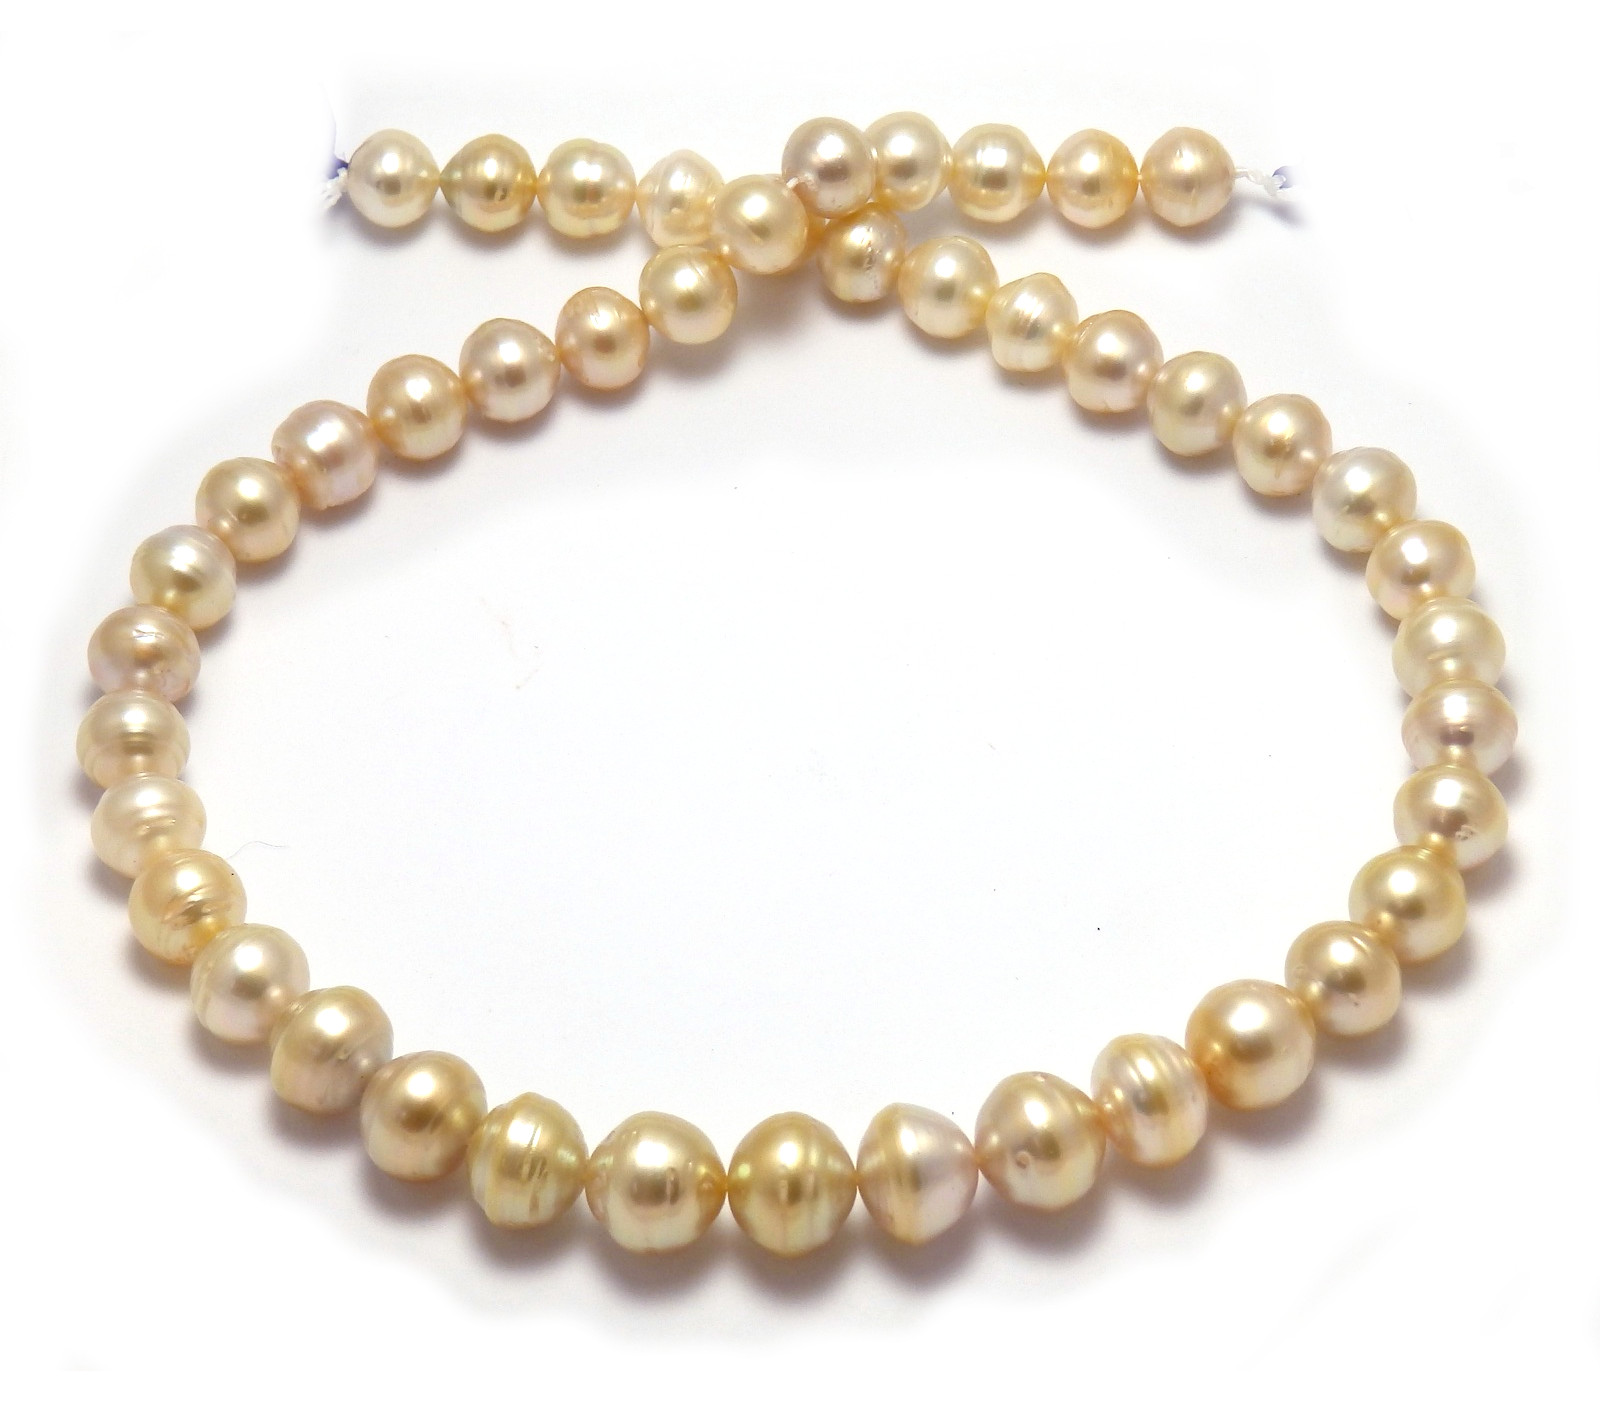 Light Golden South Sea Pearl Necklace with Semi-baroque Gold Pearls